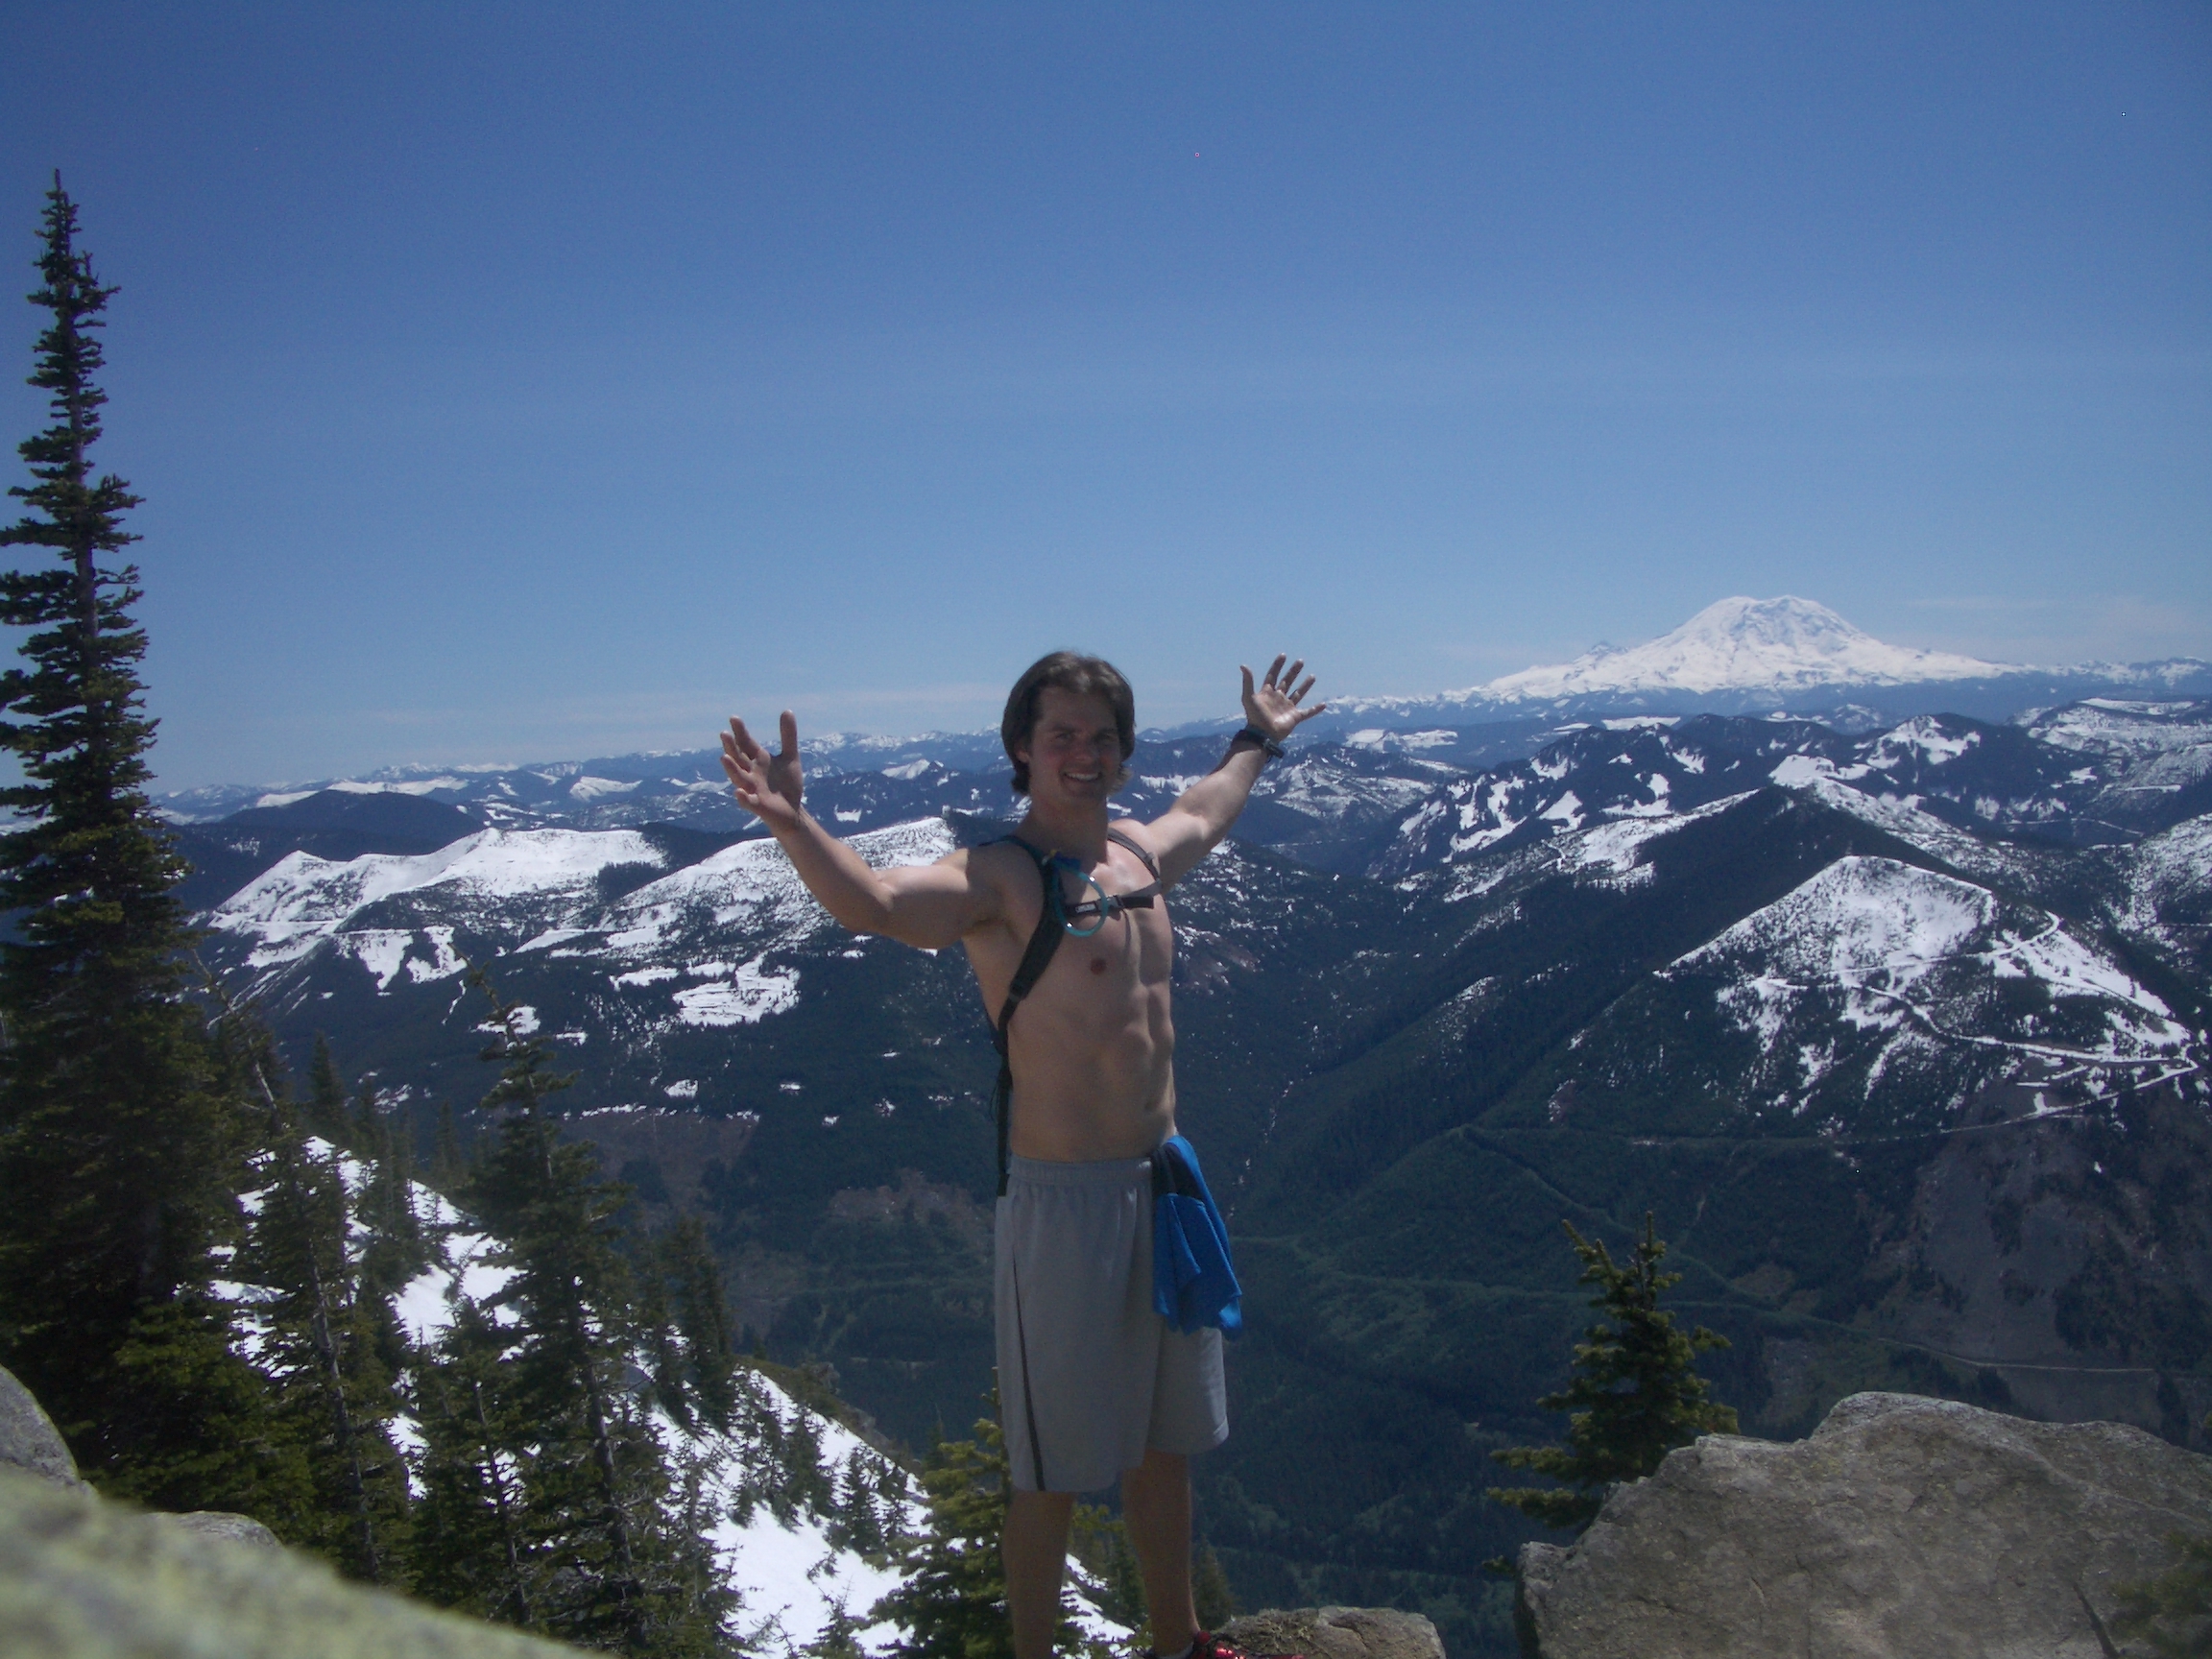 How To Enjoy A Sunny Day In Seattle… Hiking/Trail Running!